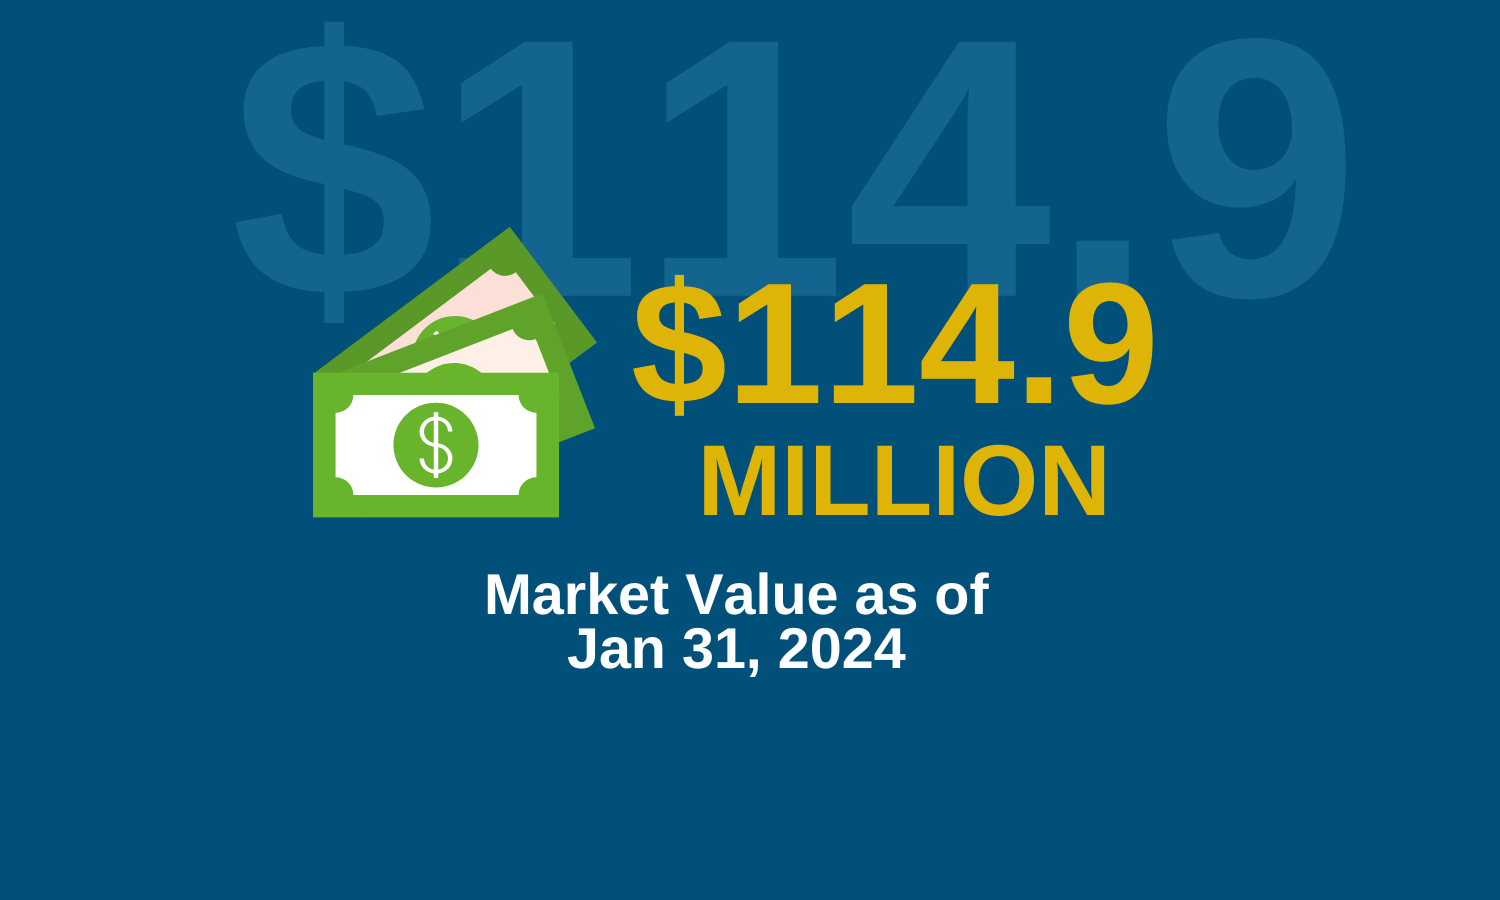 Graphic describing the market value at $114.9 million dollars as of Jan 31, 2024.